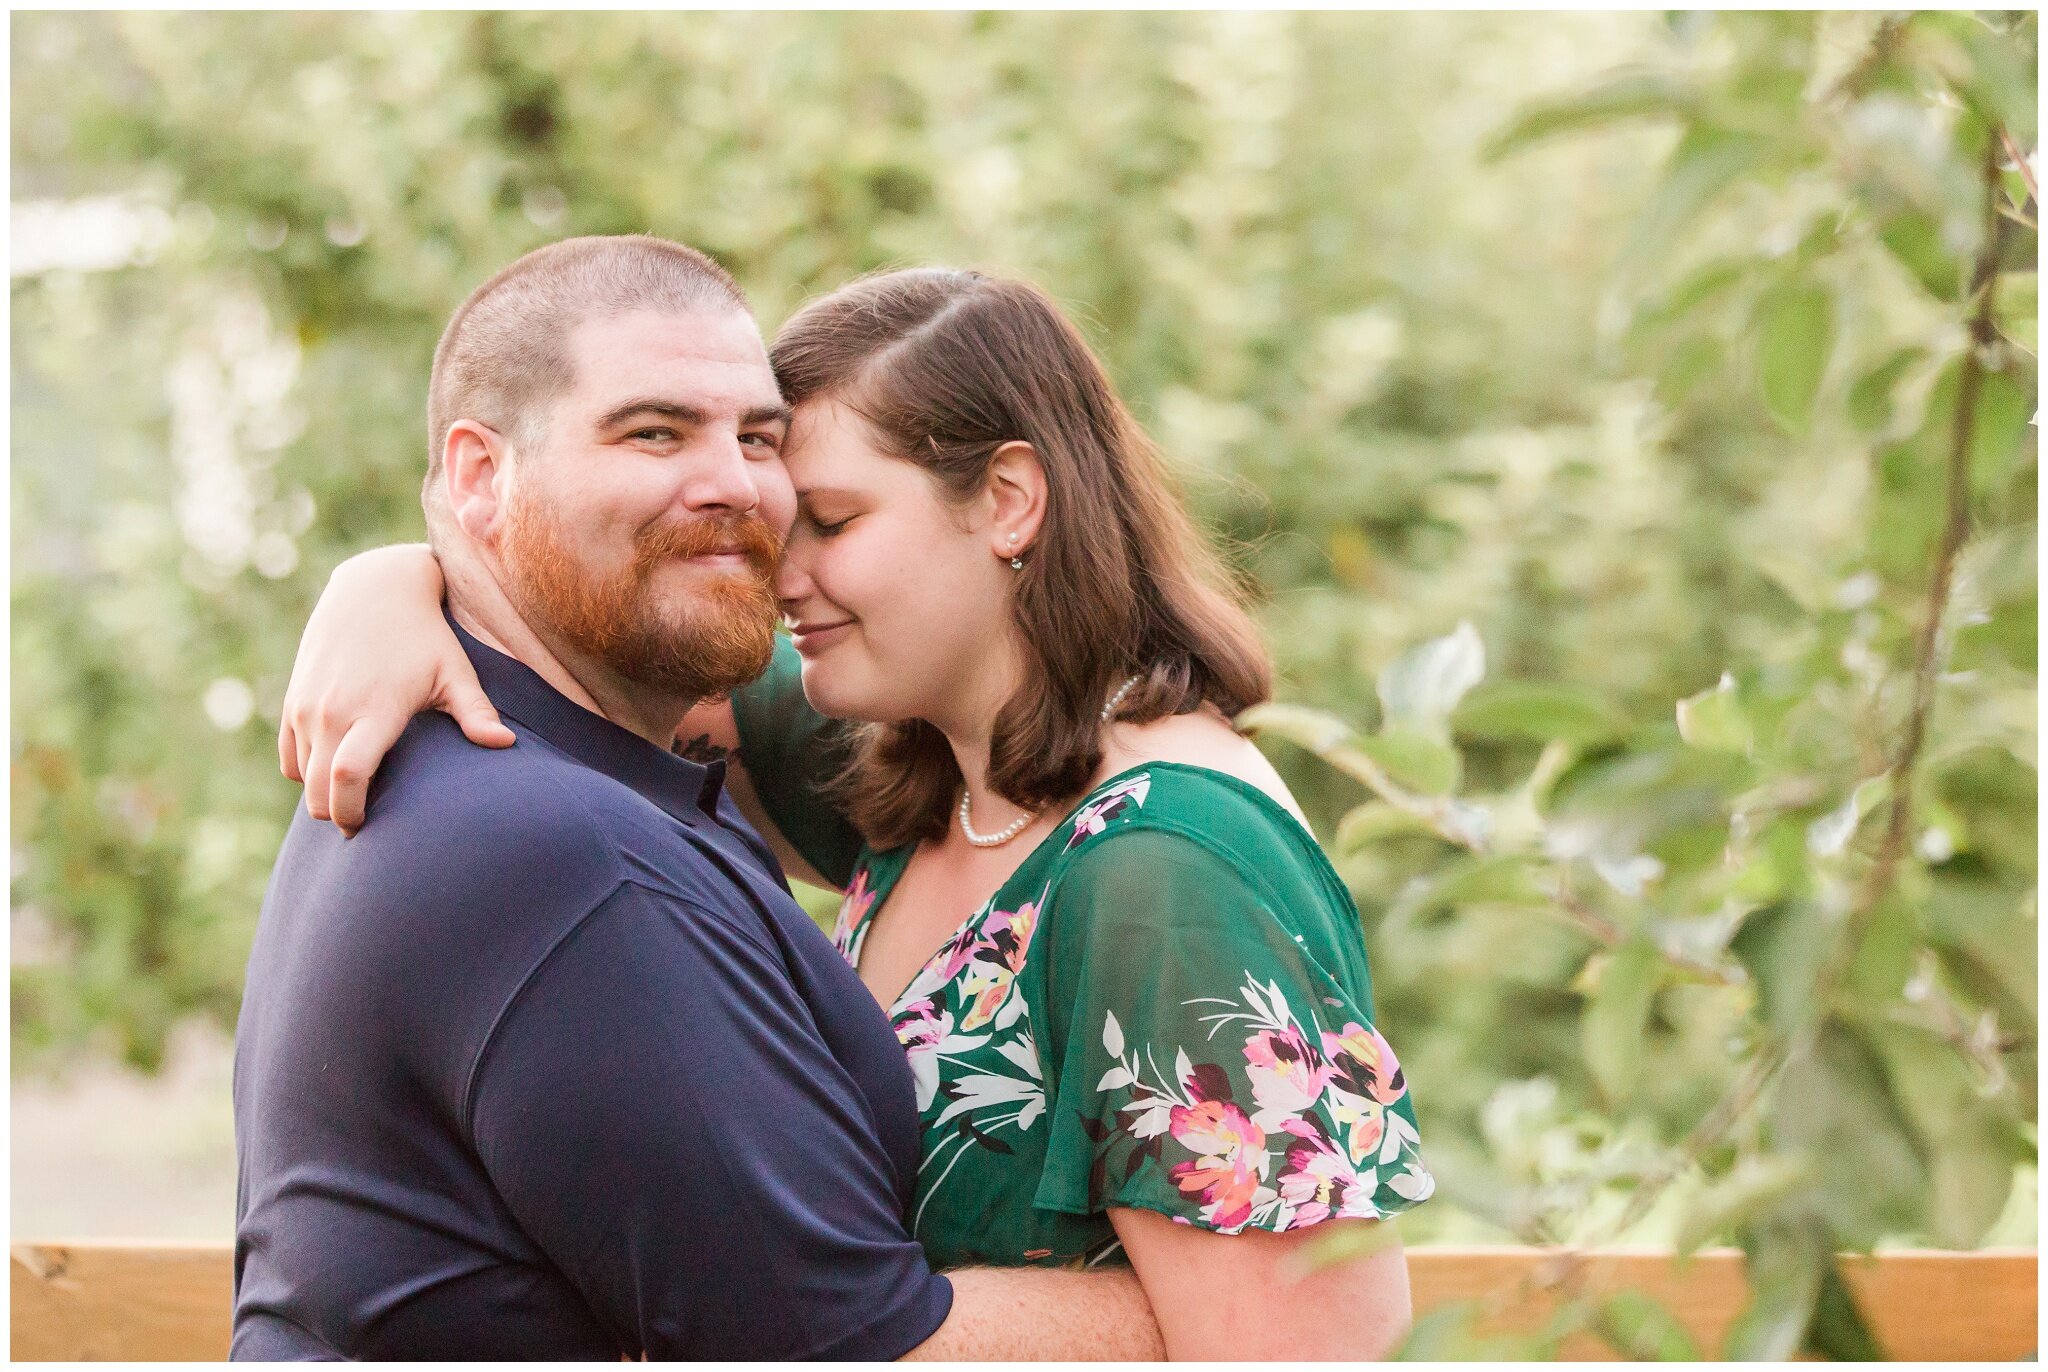 New Hampshire engagement session in a vineyard / distillery